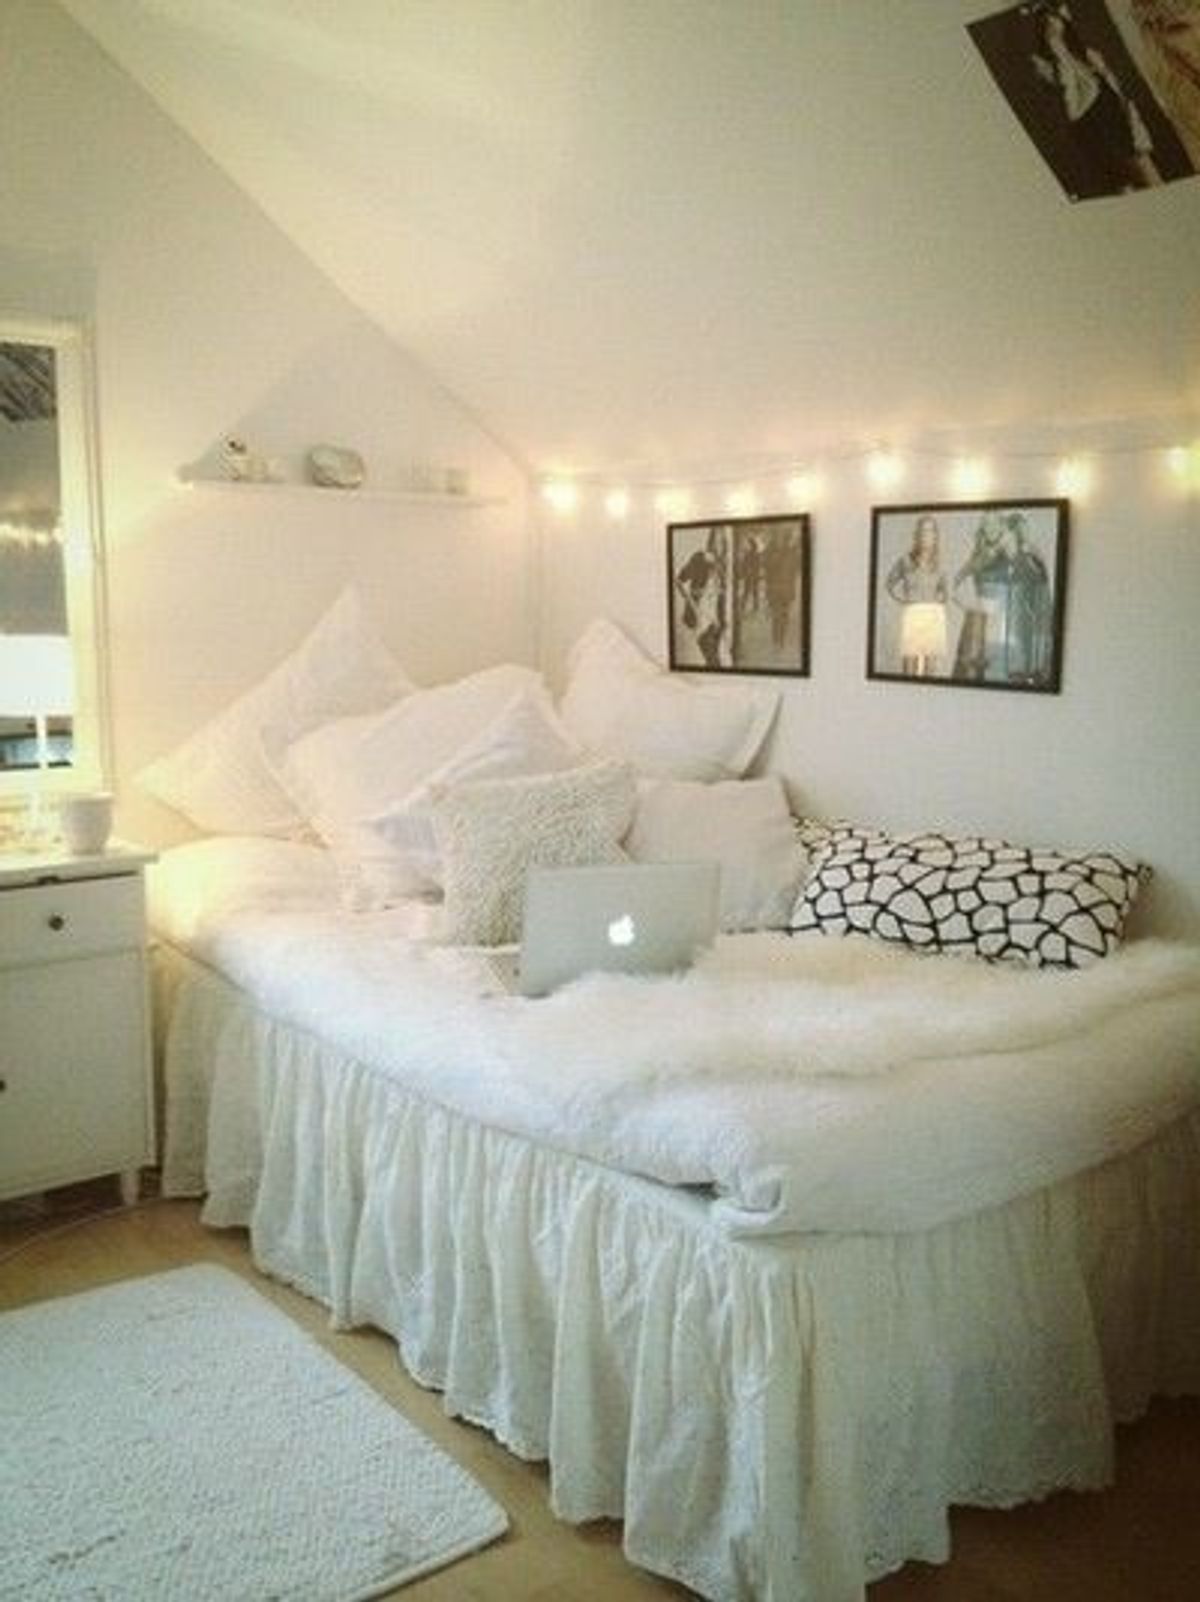 7 Ways To Make Your Room Tumblr-Worthy